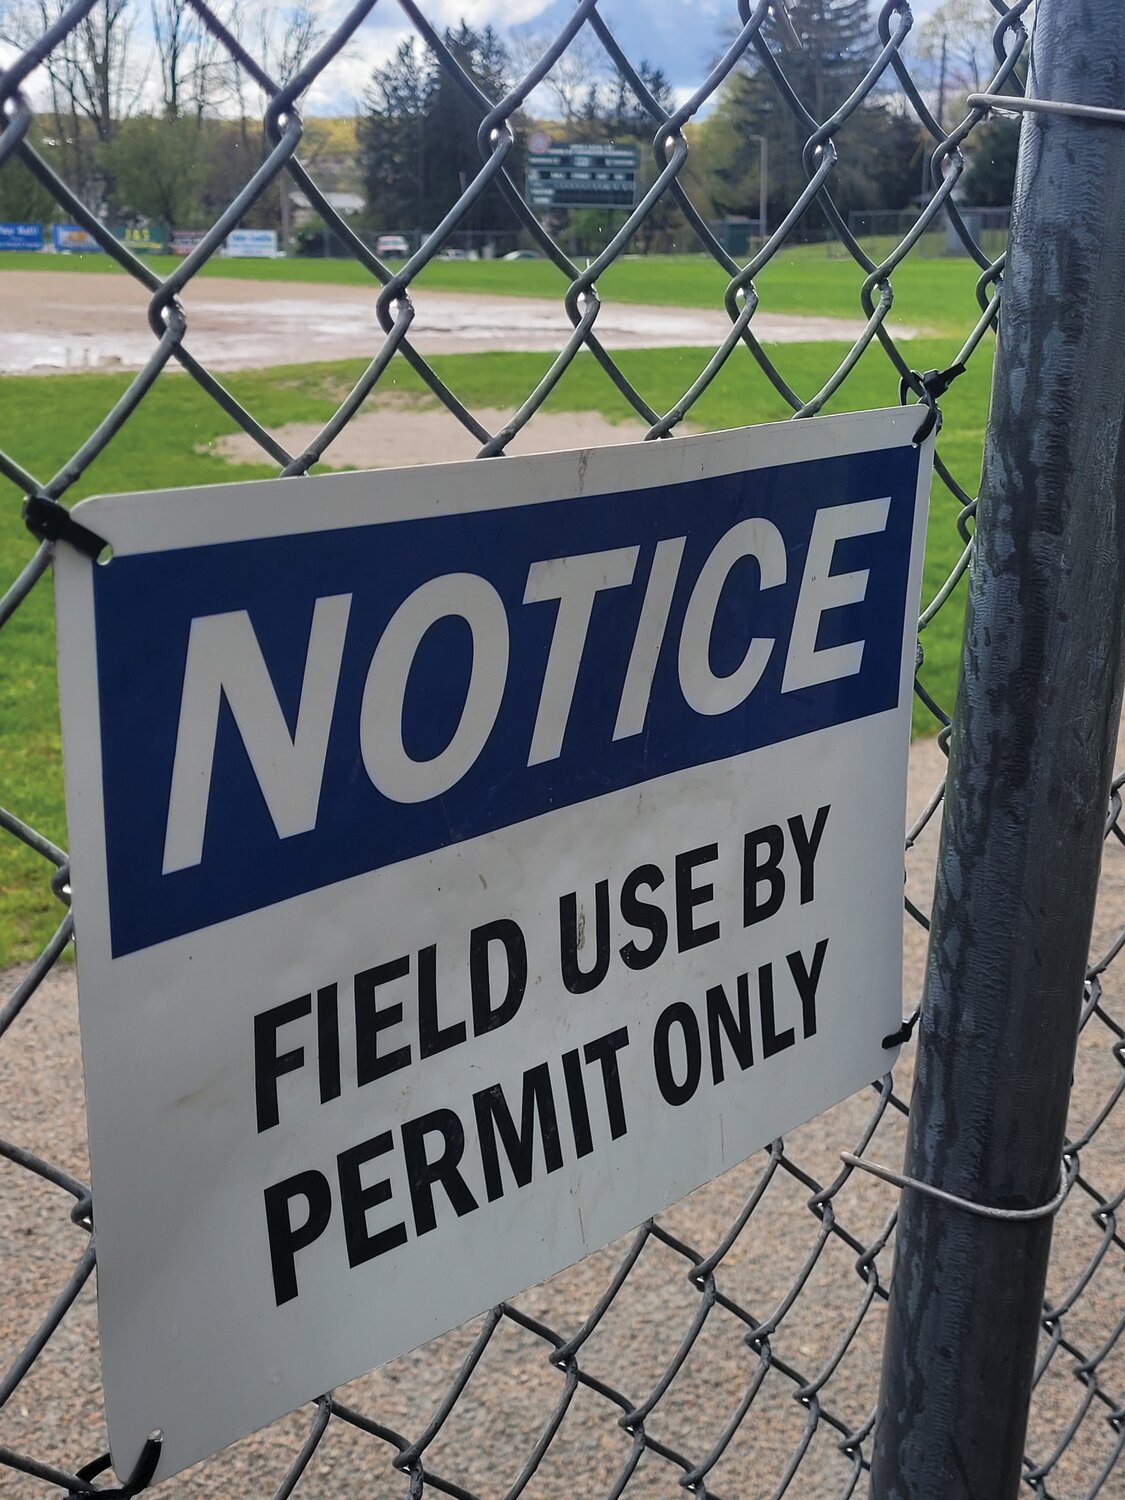 OPEN FOR PLAY? Johnston has been locking most of the town’s ballfields. One town councilman would like to see that policy change. The town’s director of buildings and grounds, however, says the locks keep out pooping dogs and their irresponsible owners.